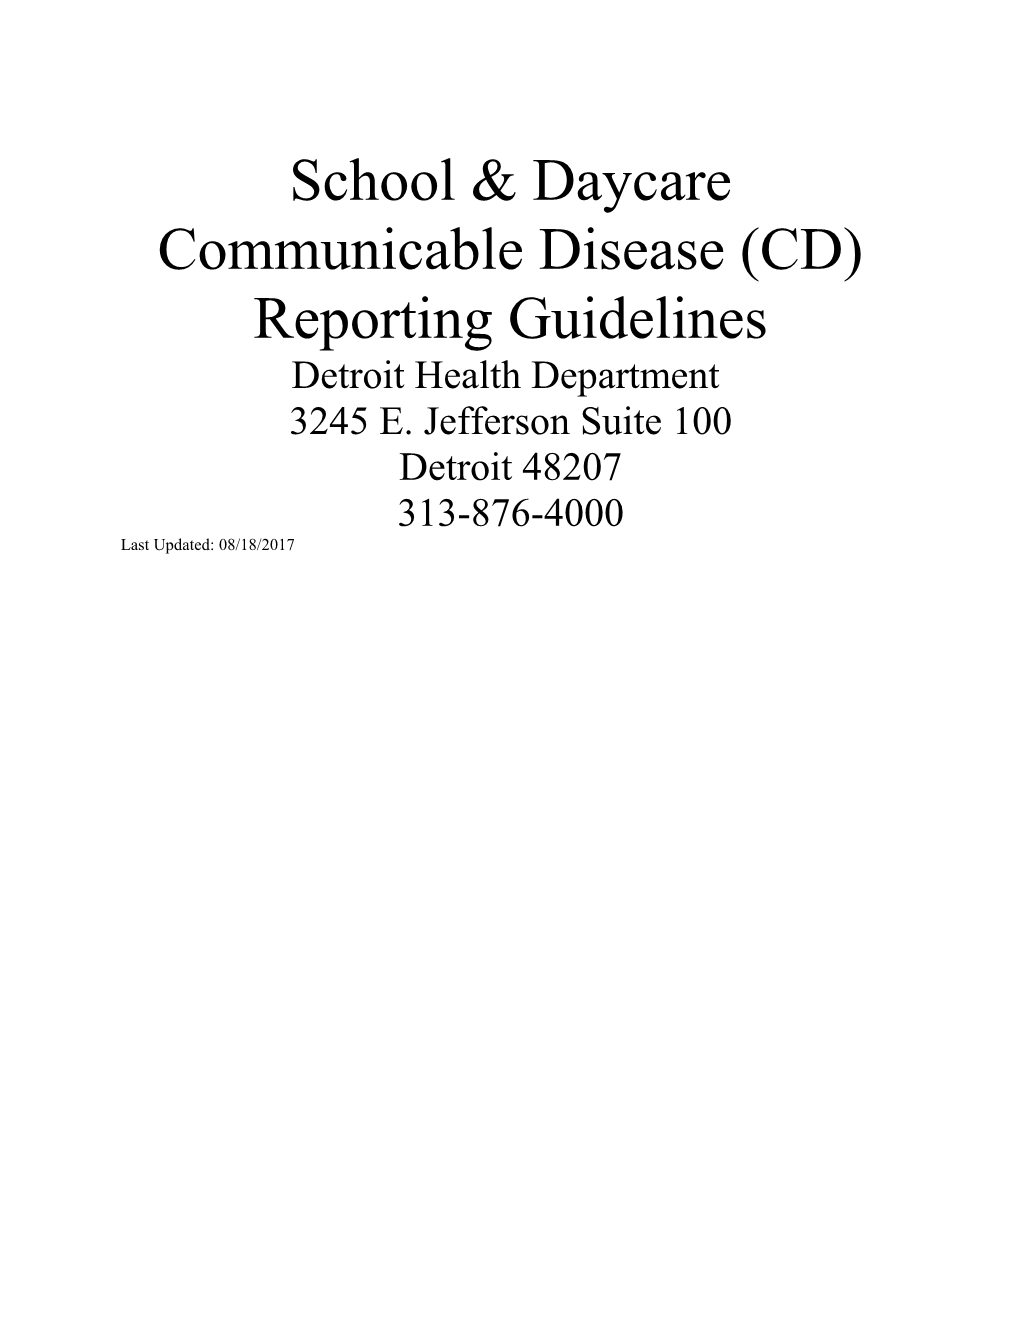 School & Daycare Communicable Disease (CD) Reporting Guidelines